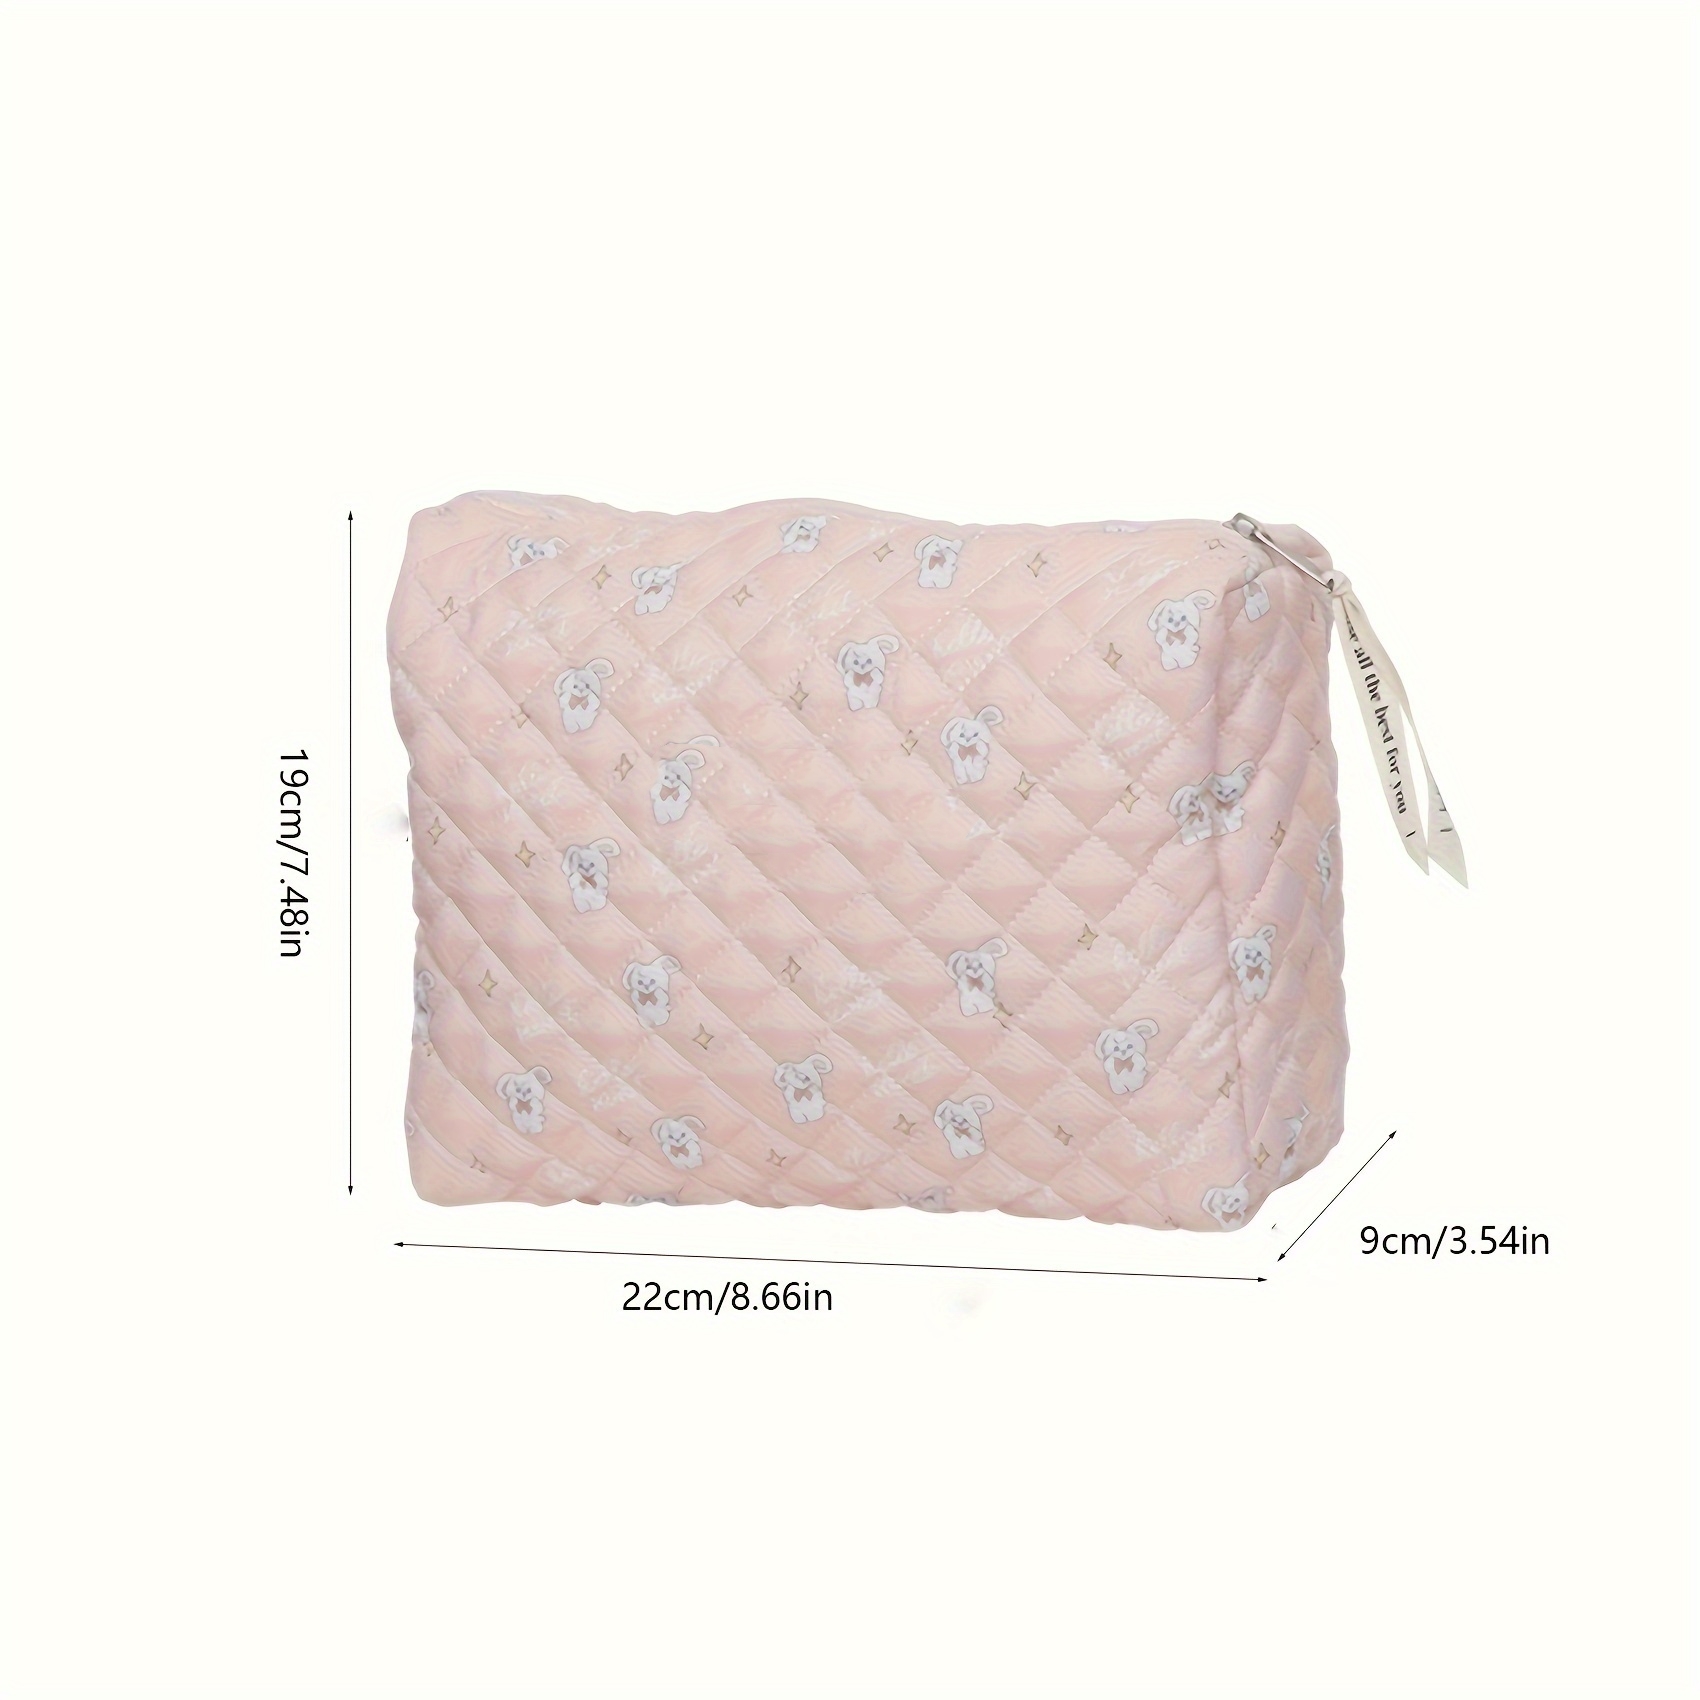 Large Capacity Cosmetic Storage Bag Product Details